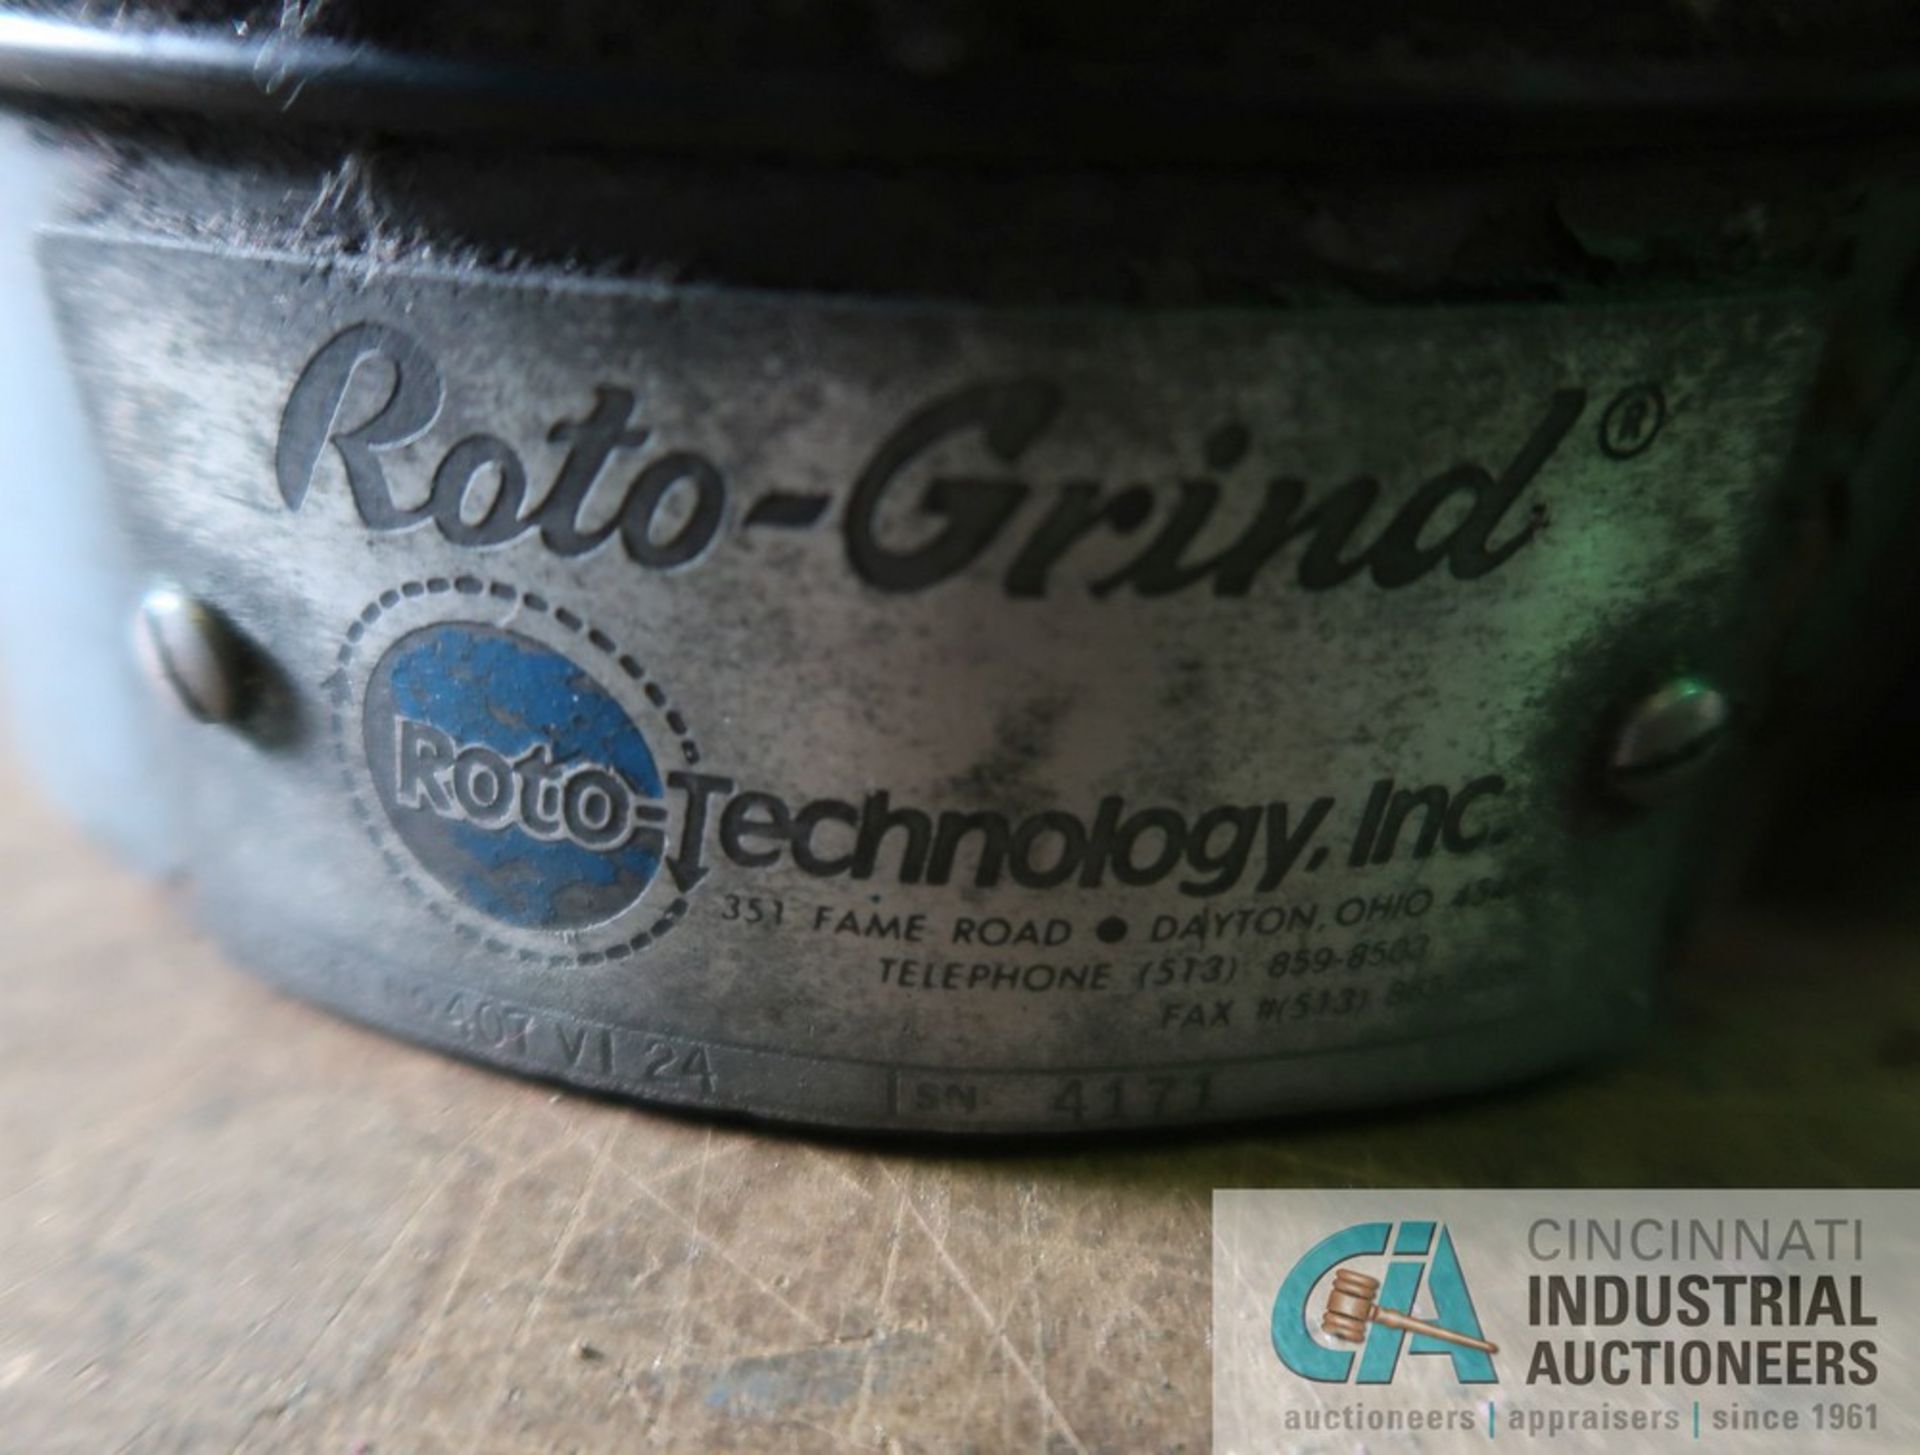 7 1/2" DIAMETER ROTO-TECHNOLOGY MODEL 407-V1-24 ROTO-GRIND ATTACHMENT, S/N 4171 WITH 6" DIAMETER - Image 4 of 4